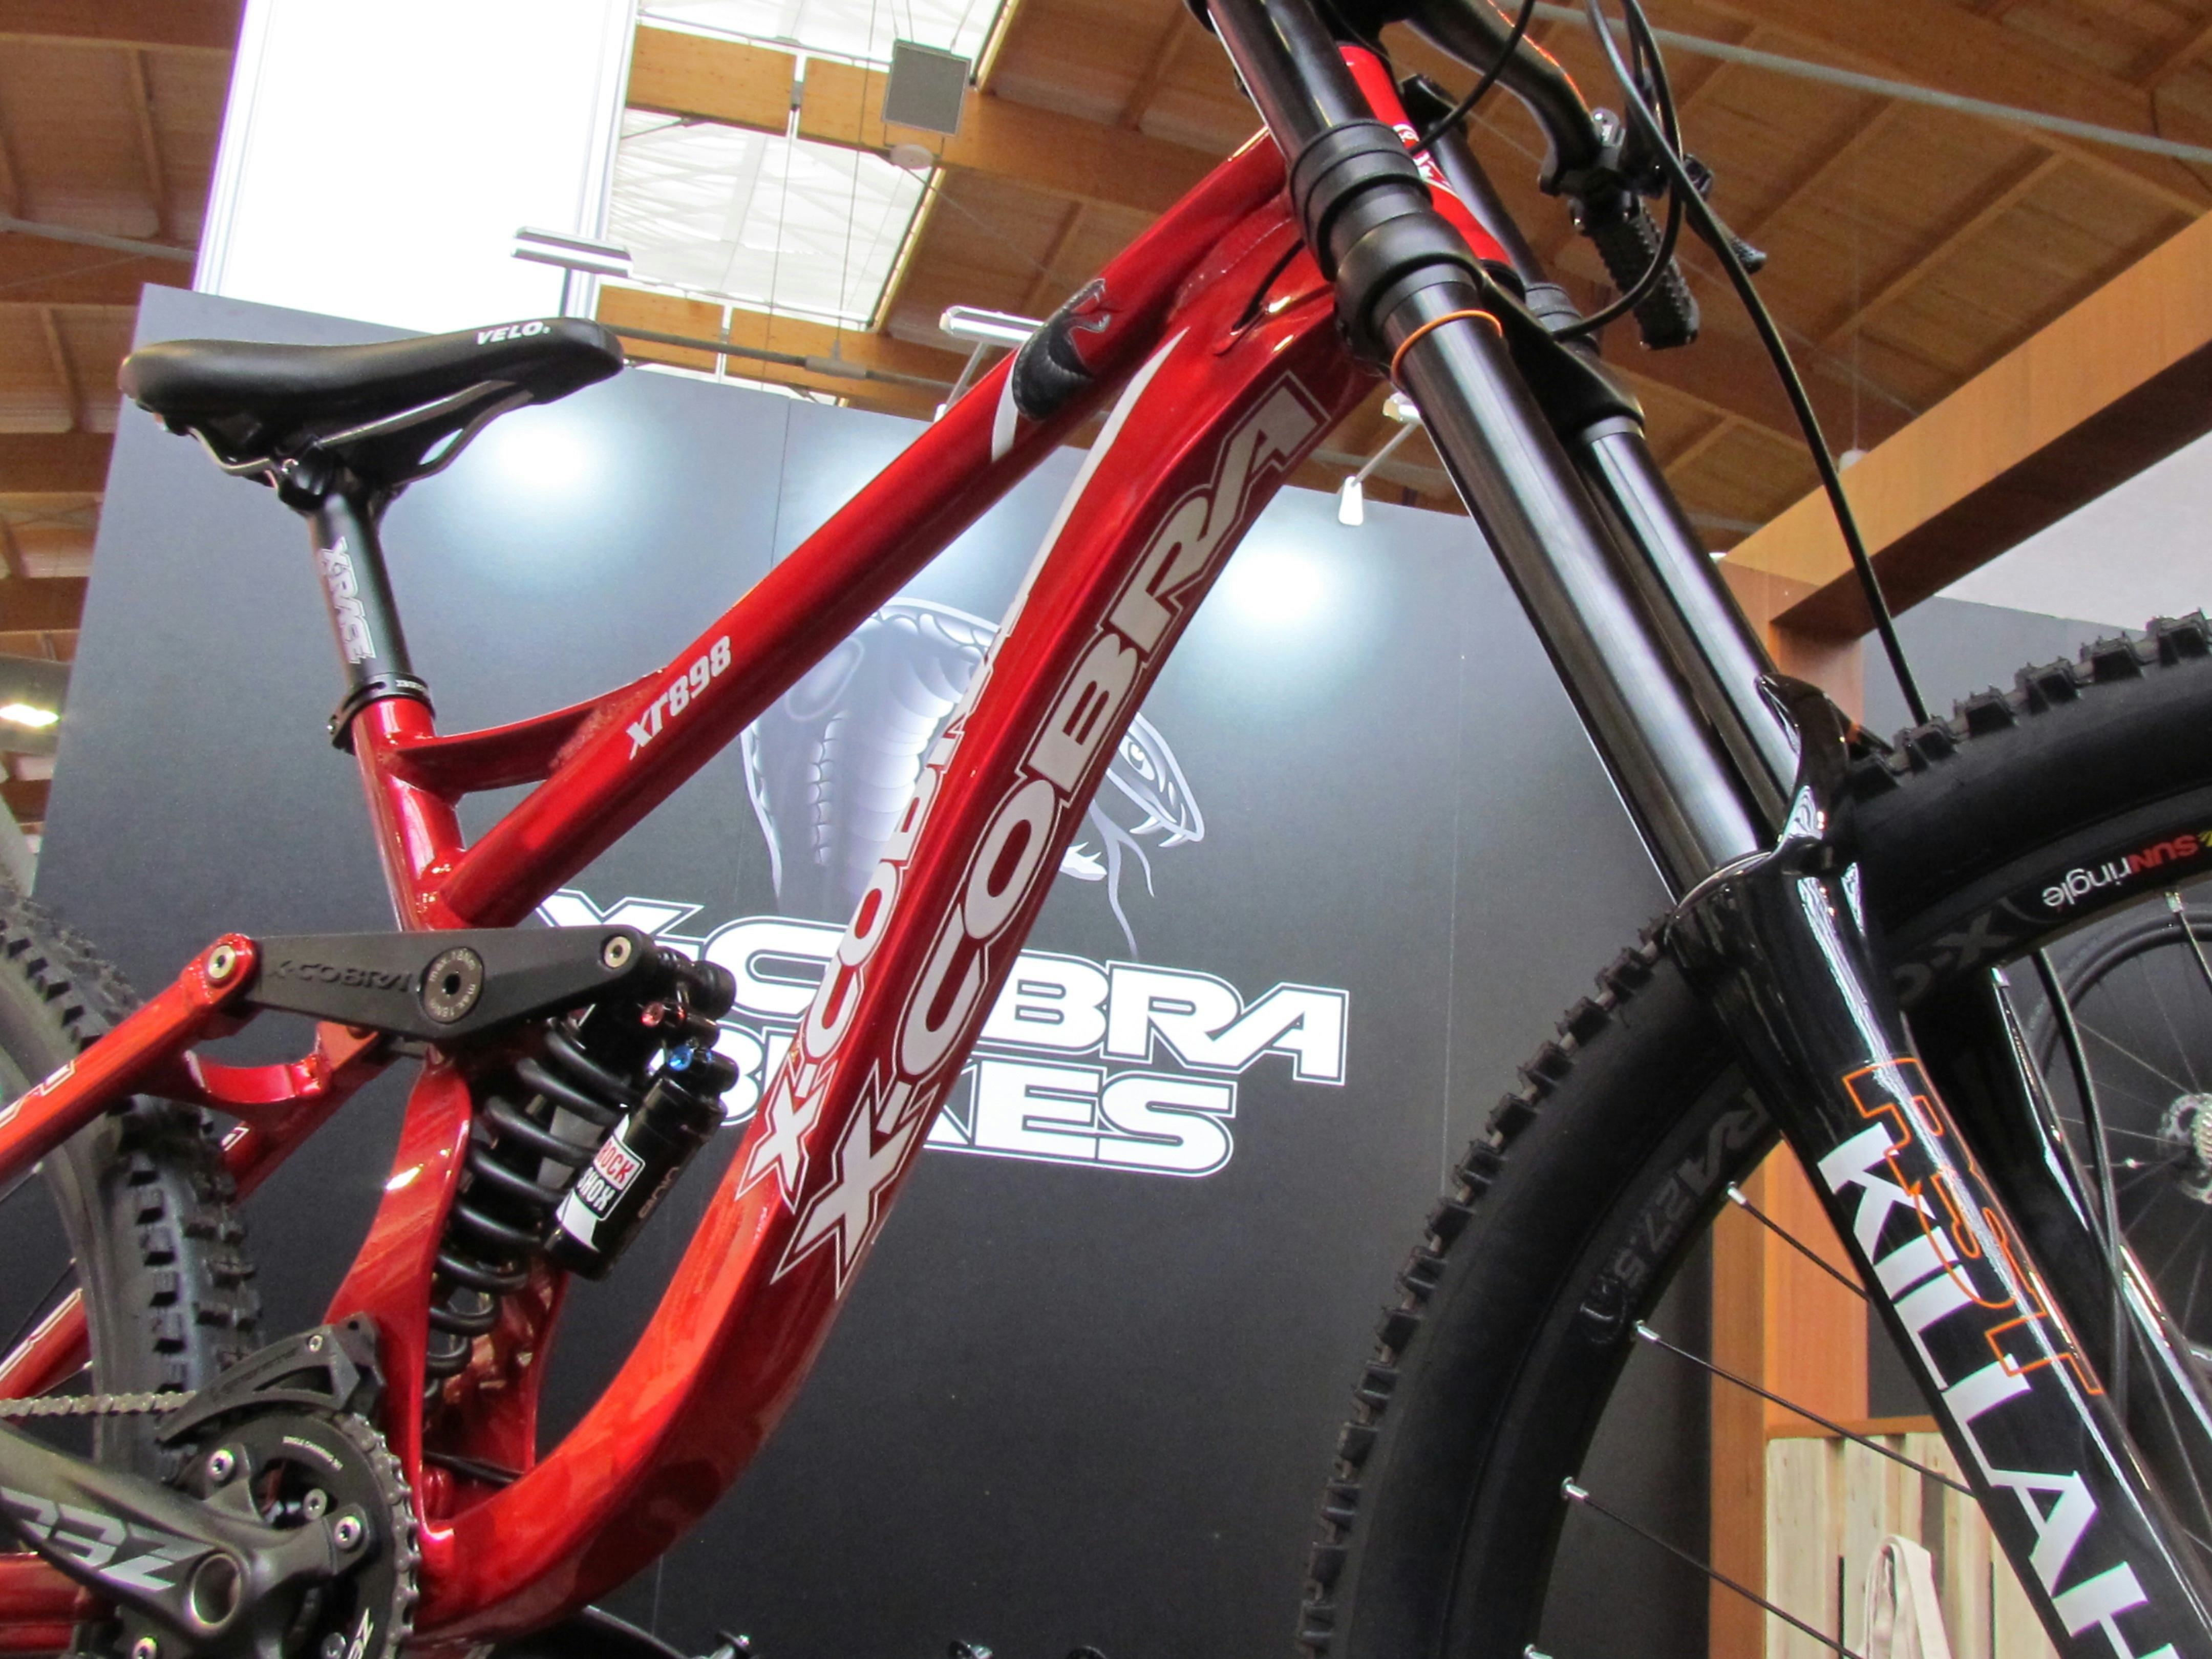 Heritage of X-Cobra premium made in Taiwan (electric) Mountainbikes is Aprove; Taichung based frame maker. – Photo Bike Europe 